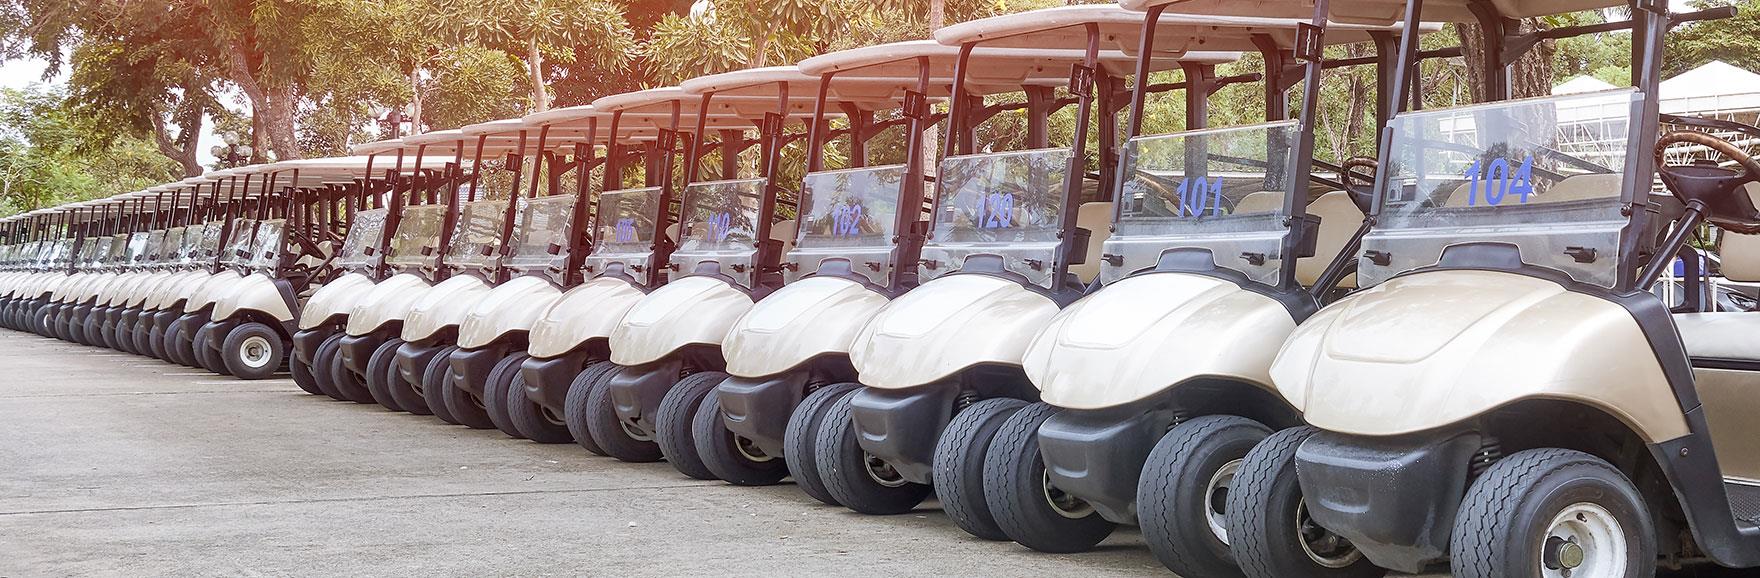 Benefits of Digital Instrument Clusters in Golf Carts